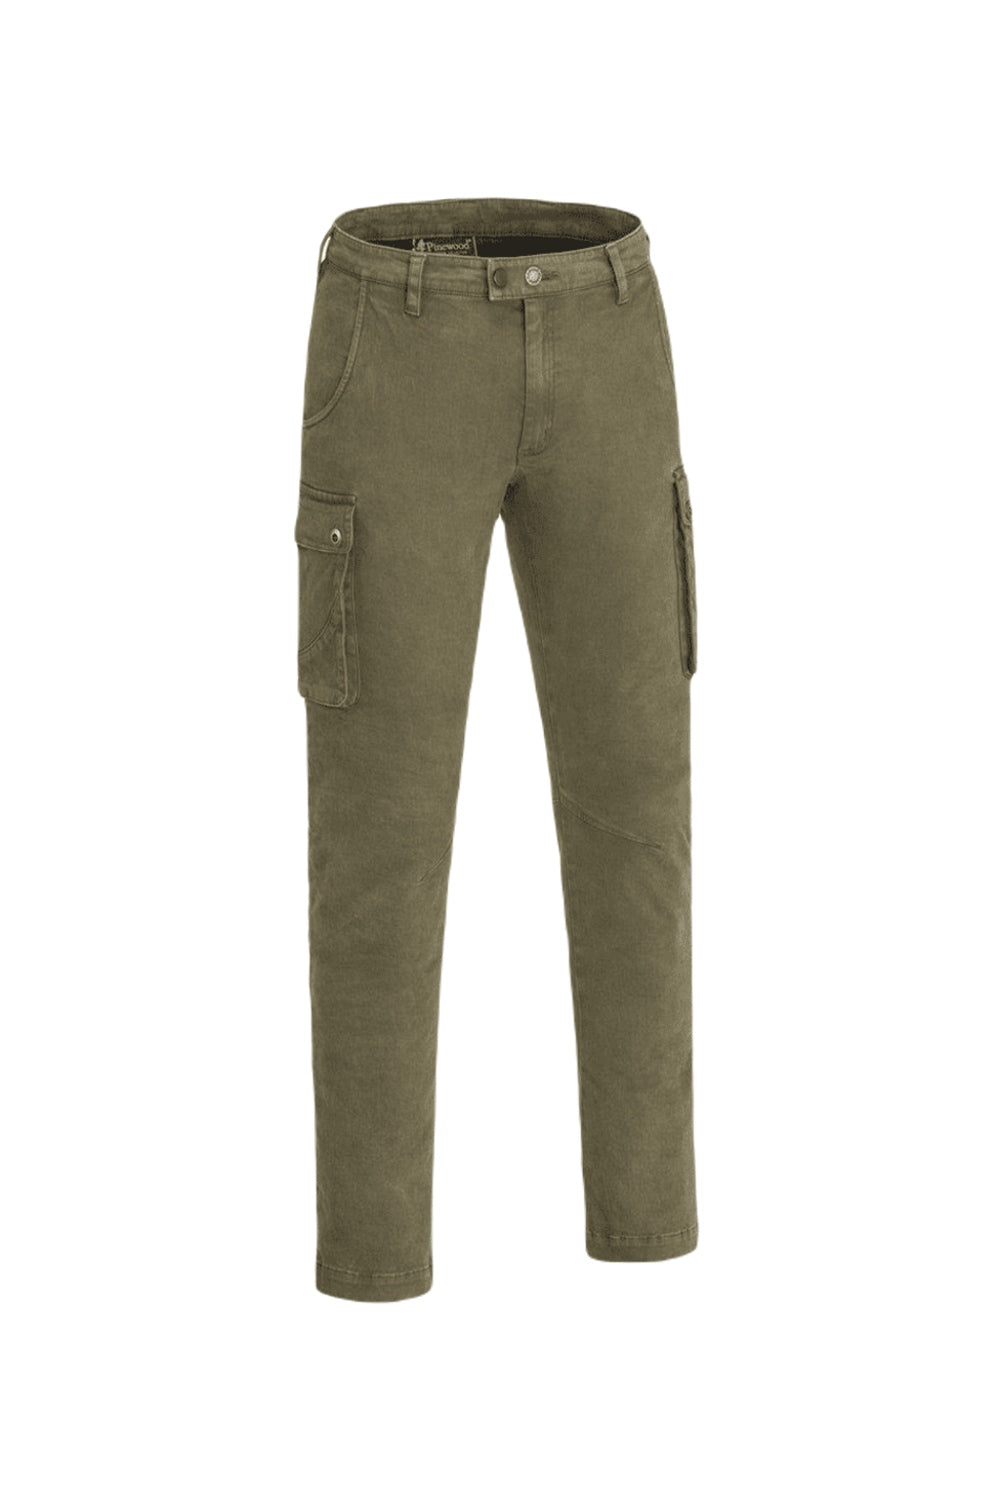 Pinewood Mens Serenget Trousers in Hunting Olive